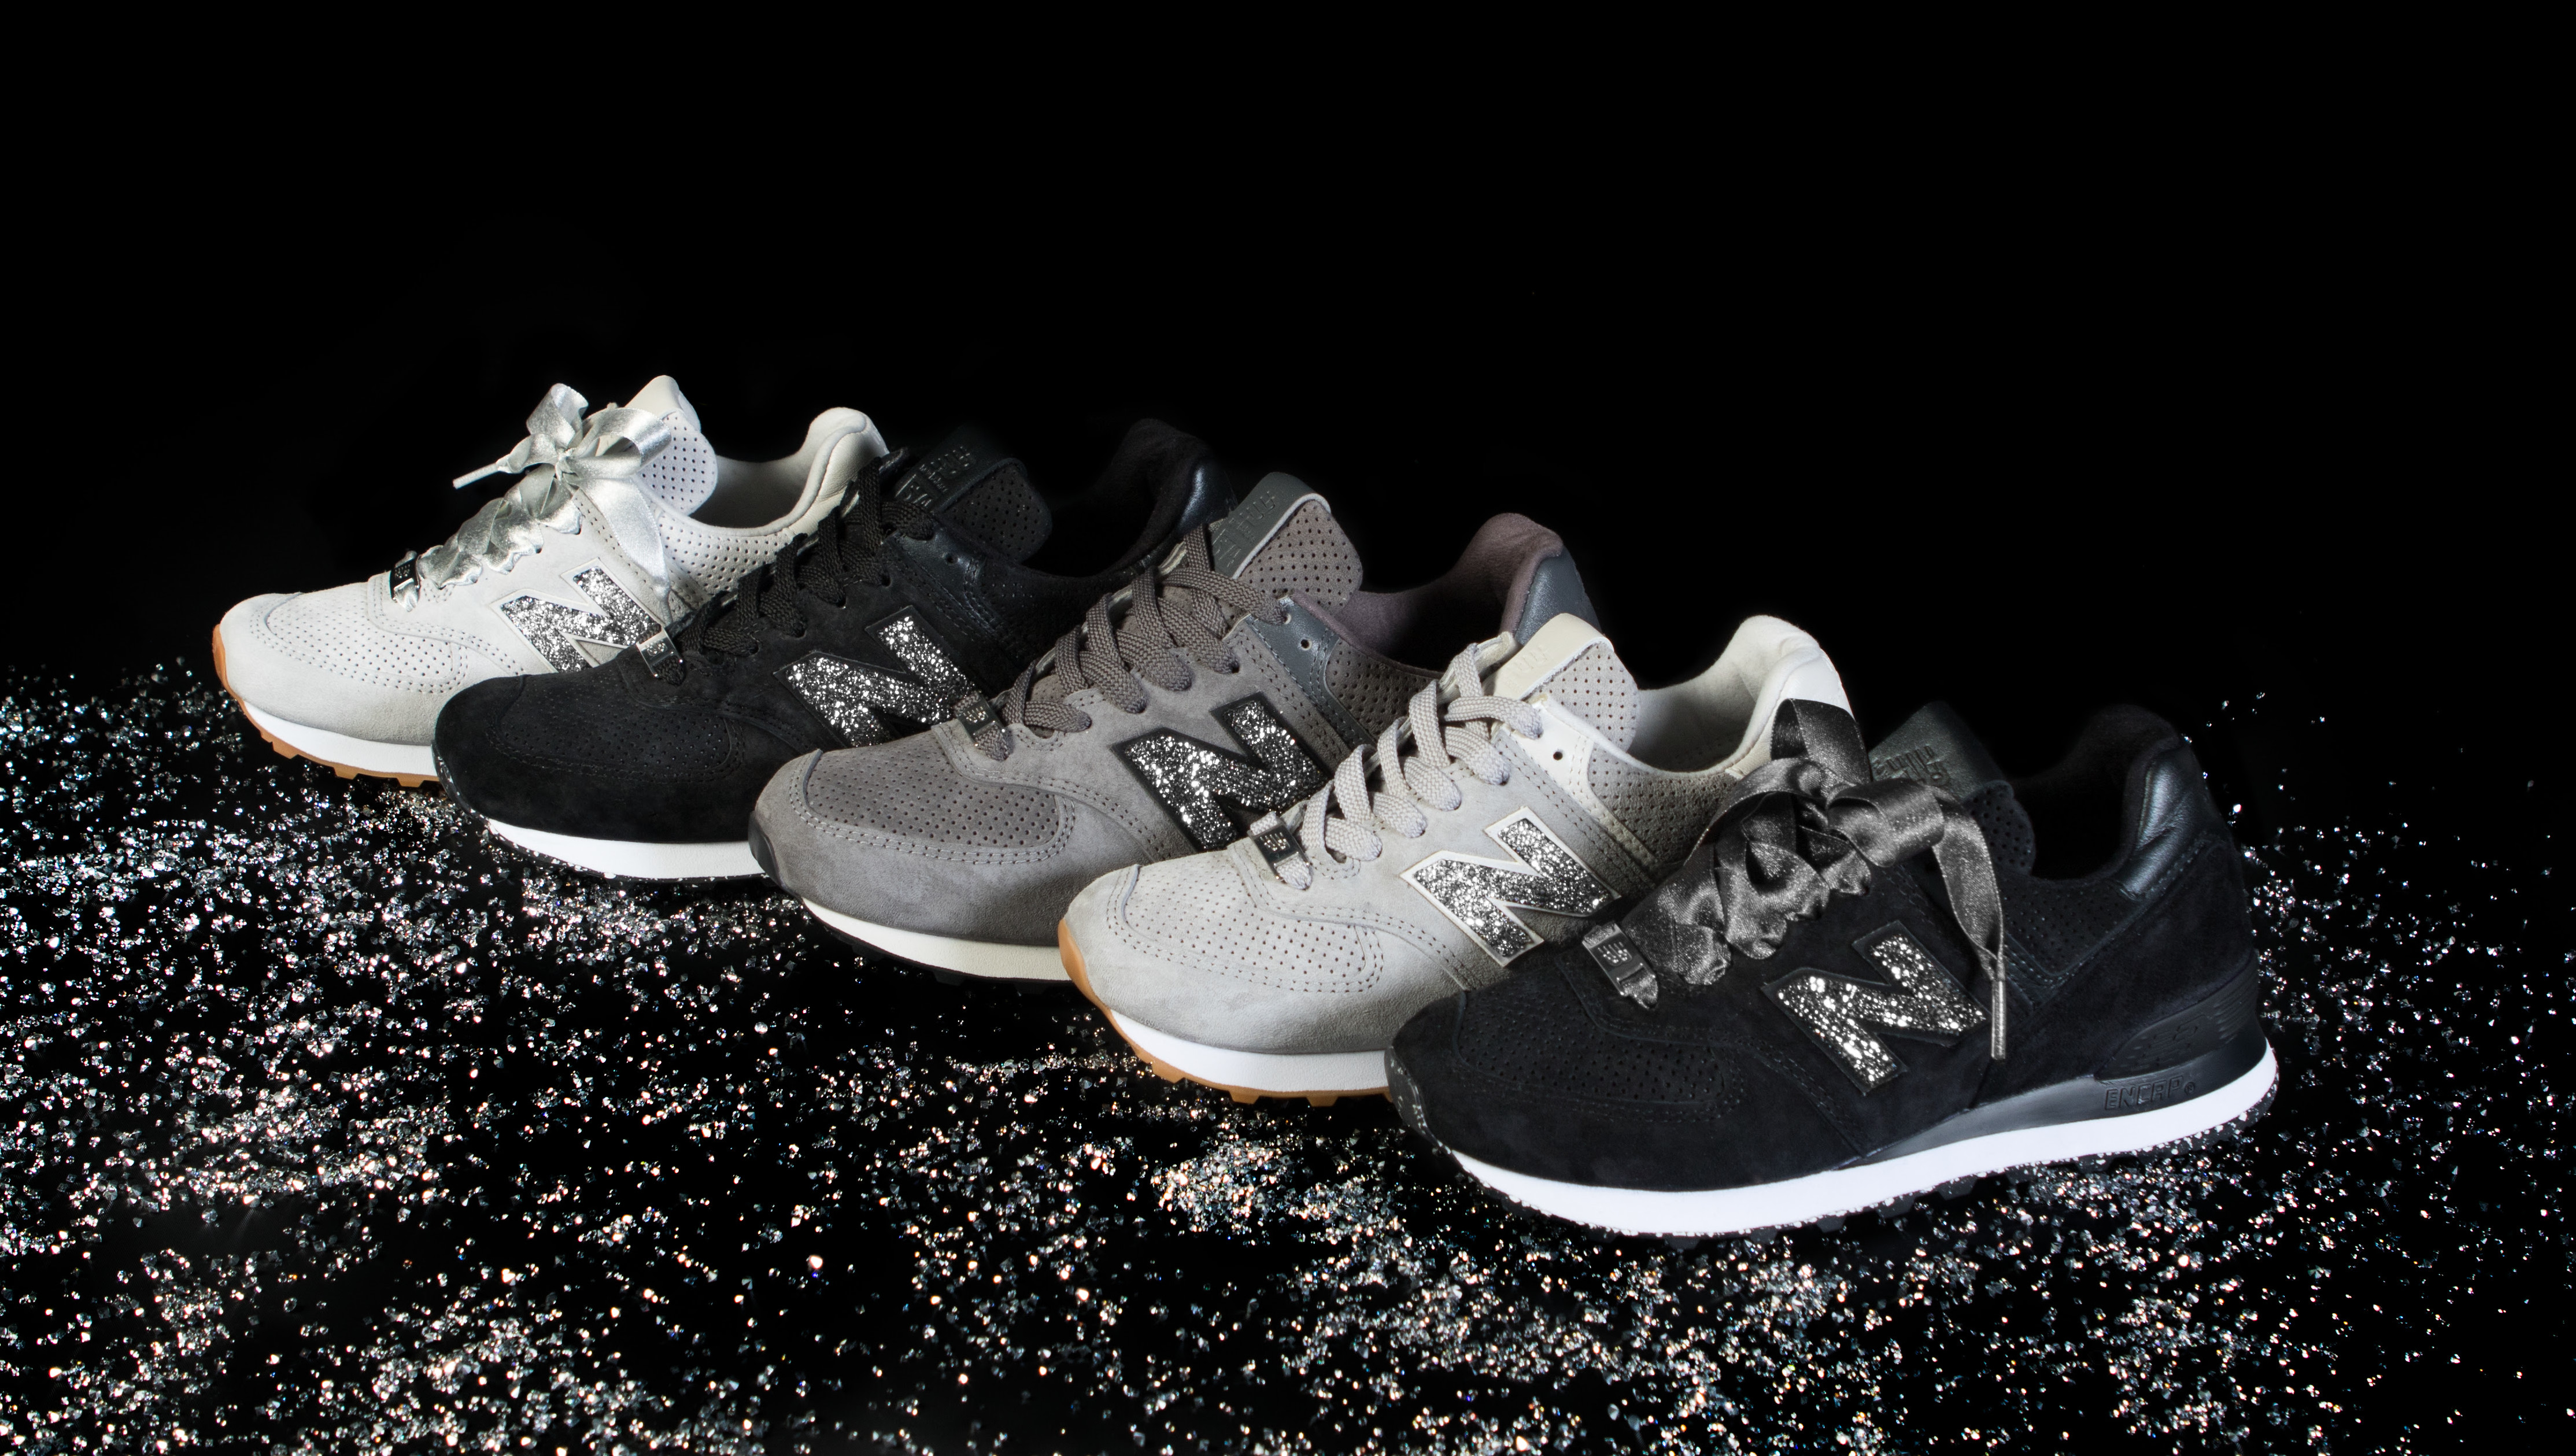 Swarovski x New Balance NB1 574 Collection Release Date | Sole ...